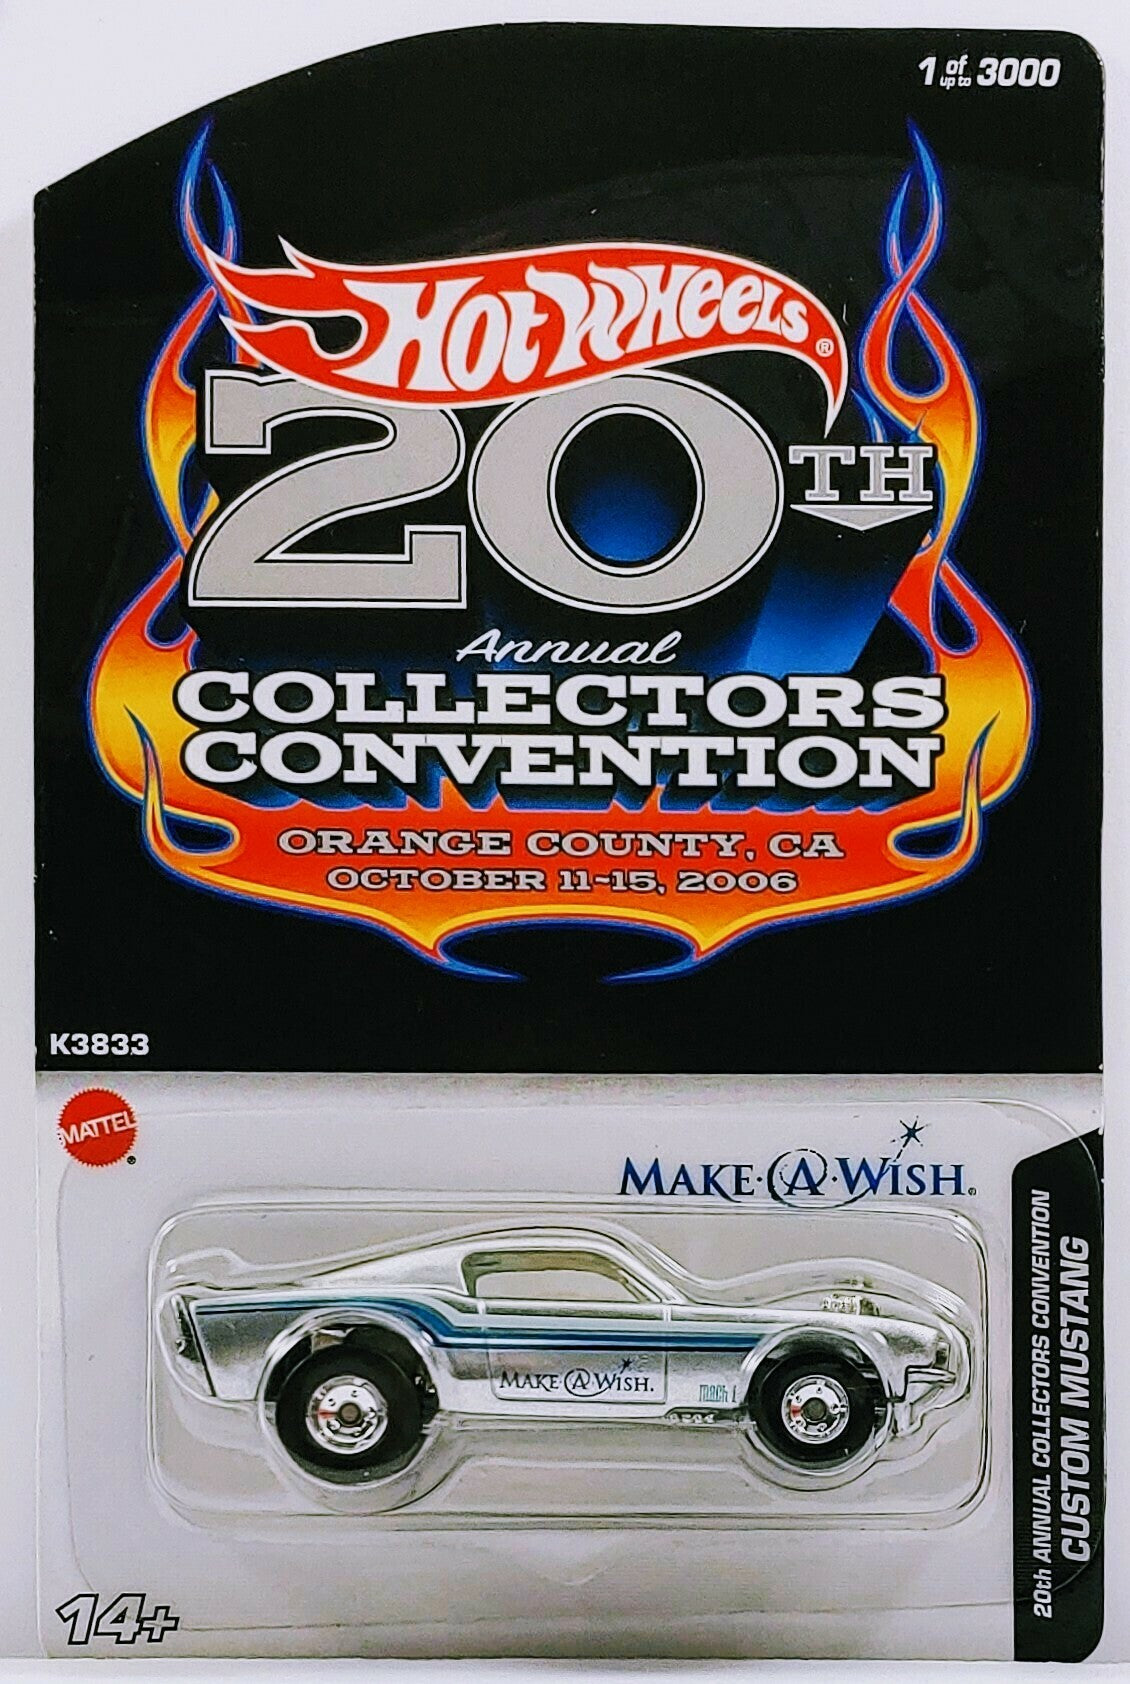 Hot Wheels 2006 - 20th Annual Collector's Convention - Charity Car / Make-A-Wish - Custom Mustang - Metallic Silver - Metal/Metal & Real Riders - Limited to 3,000